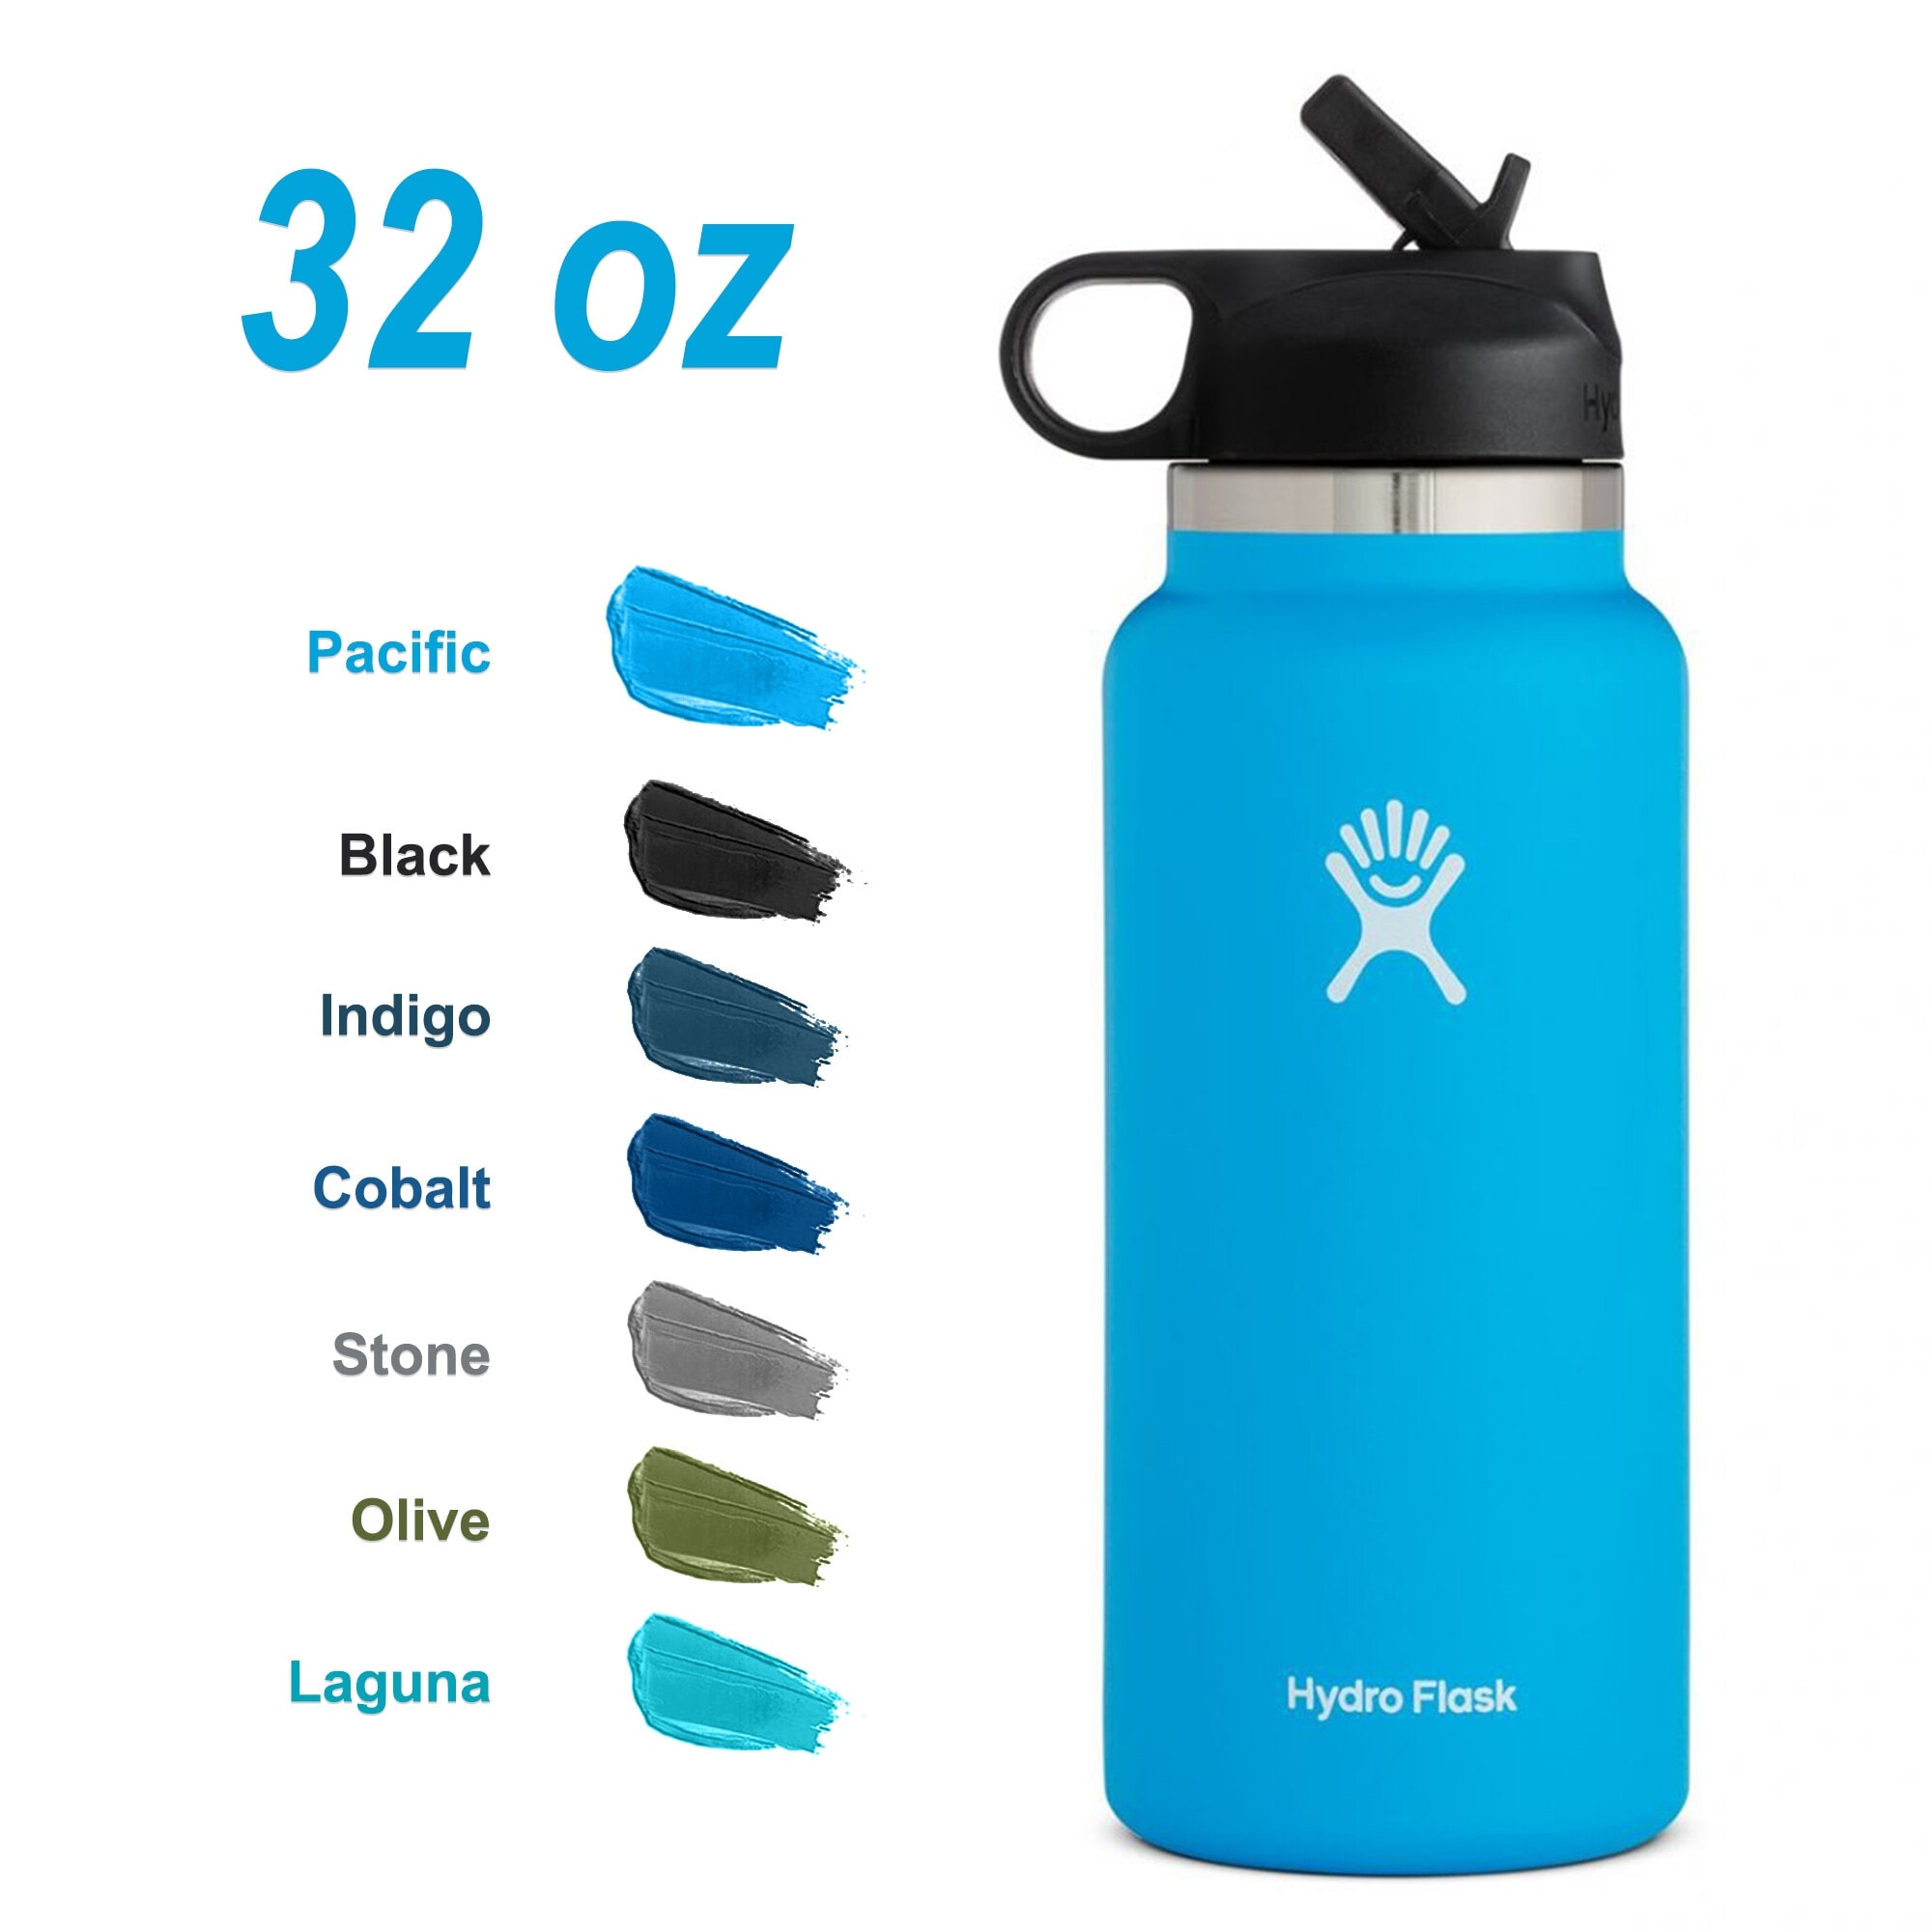 Hydro Flask Water Bottle with Straw Lid - 32oz / Light Yellow in